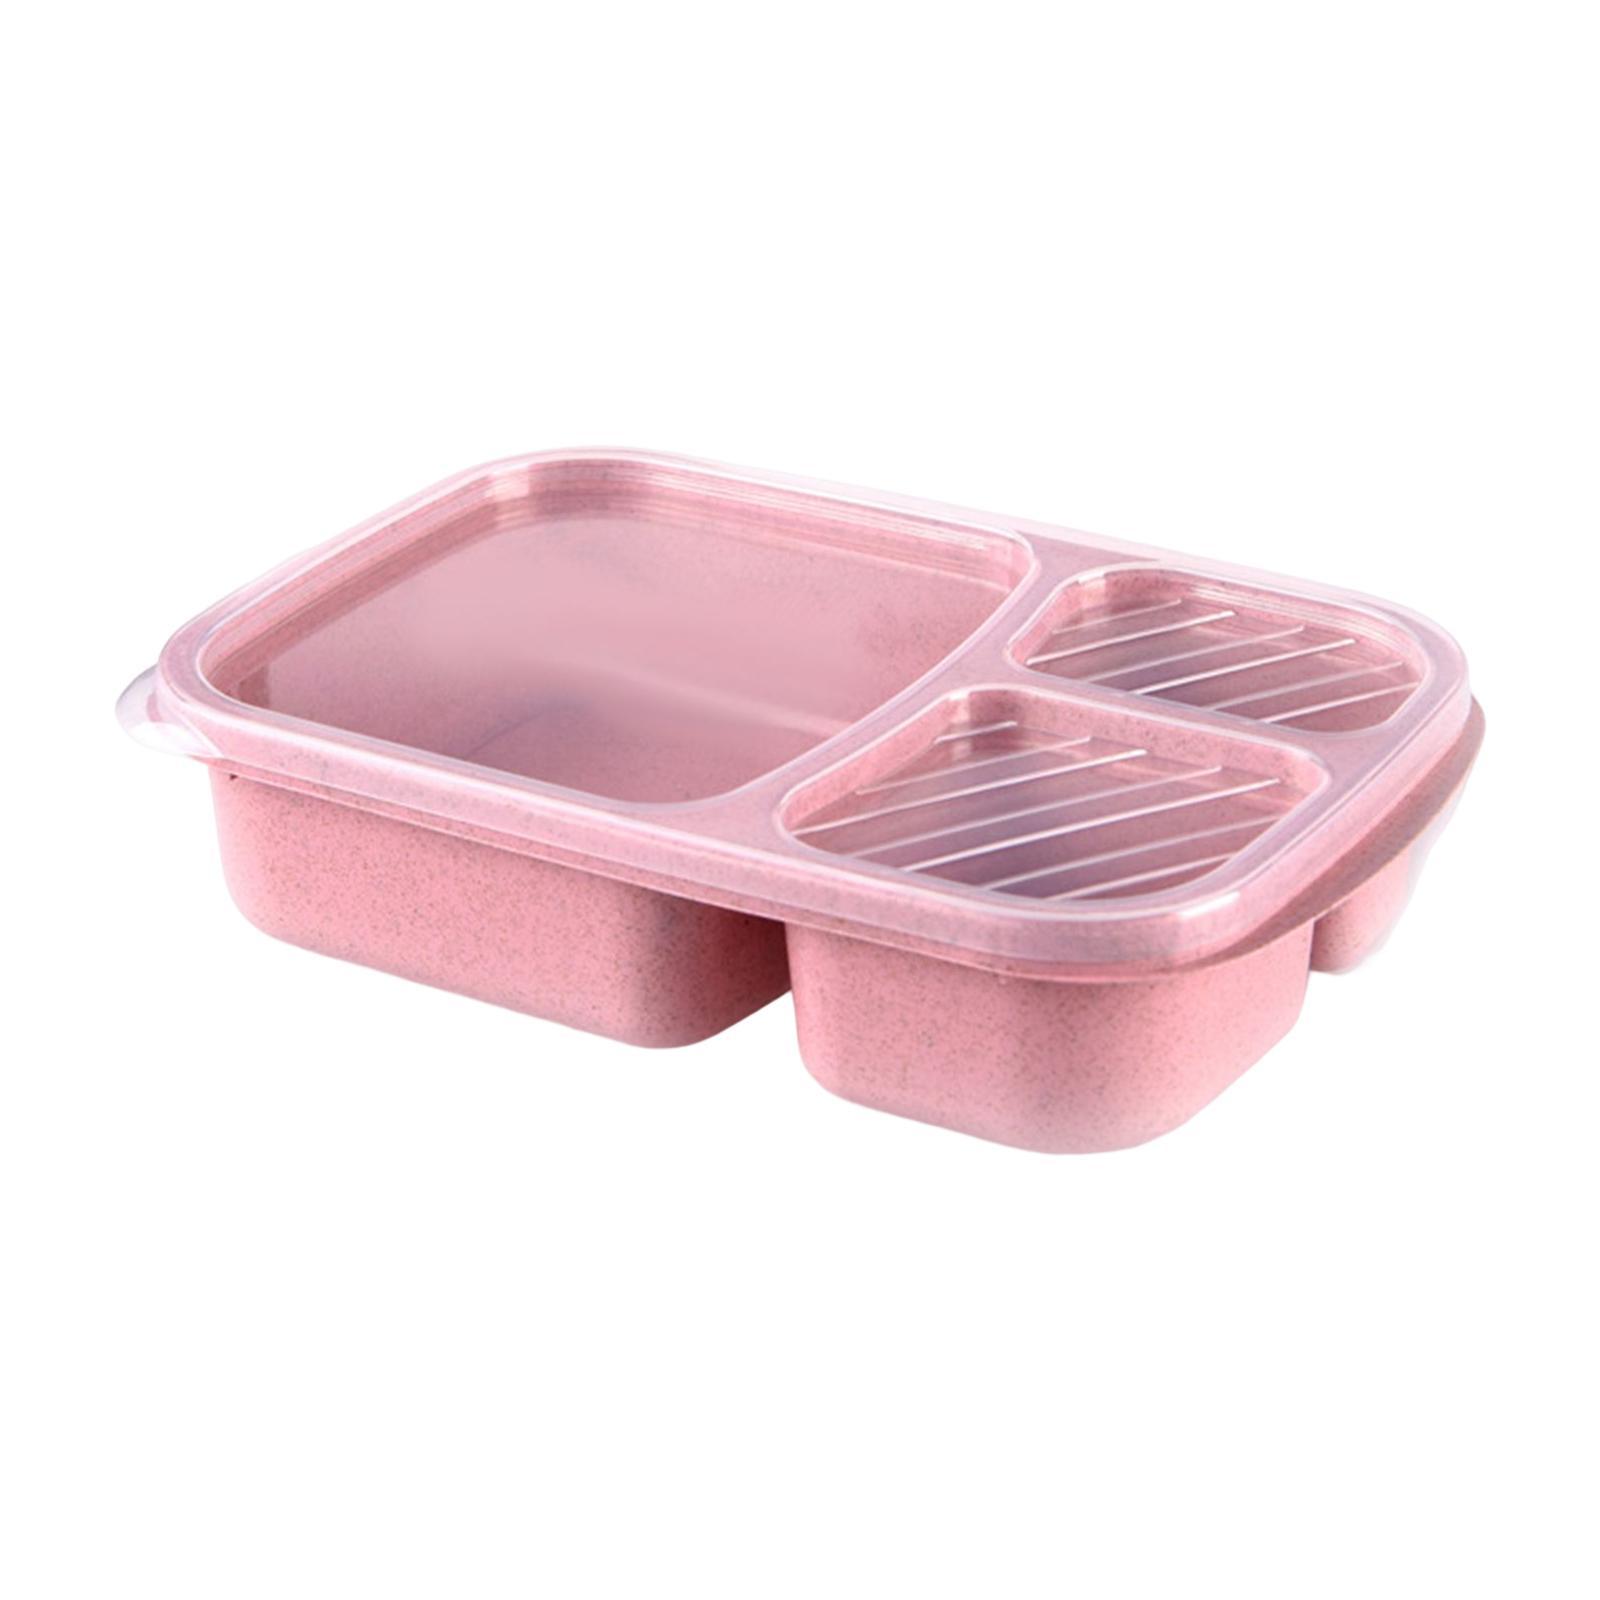 Airtight Lunchbox Microwave Bento Leakproof Utensils Food Container Lunch